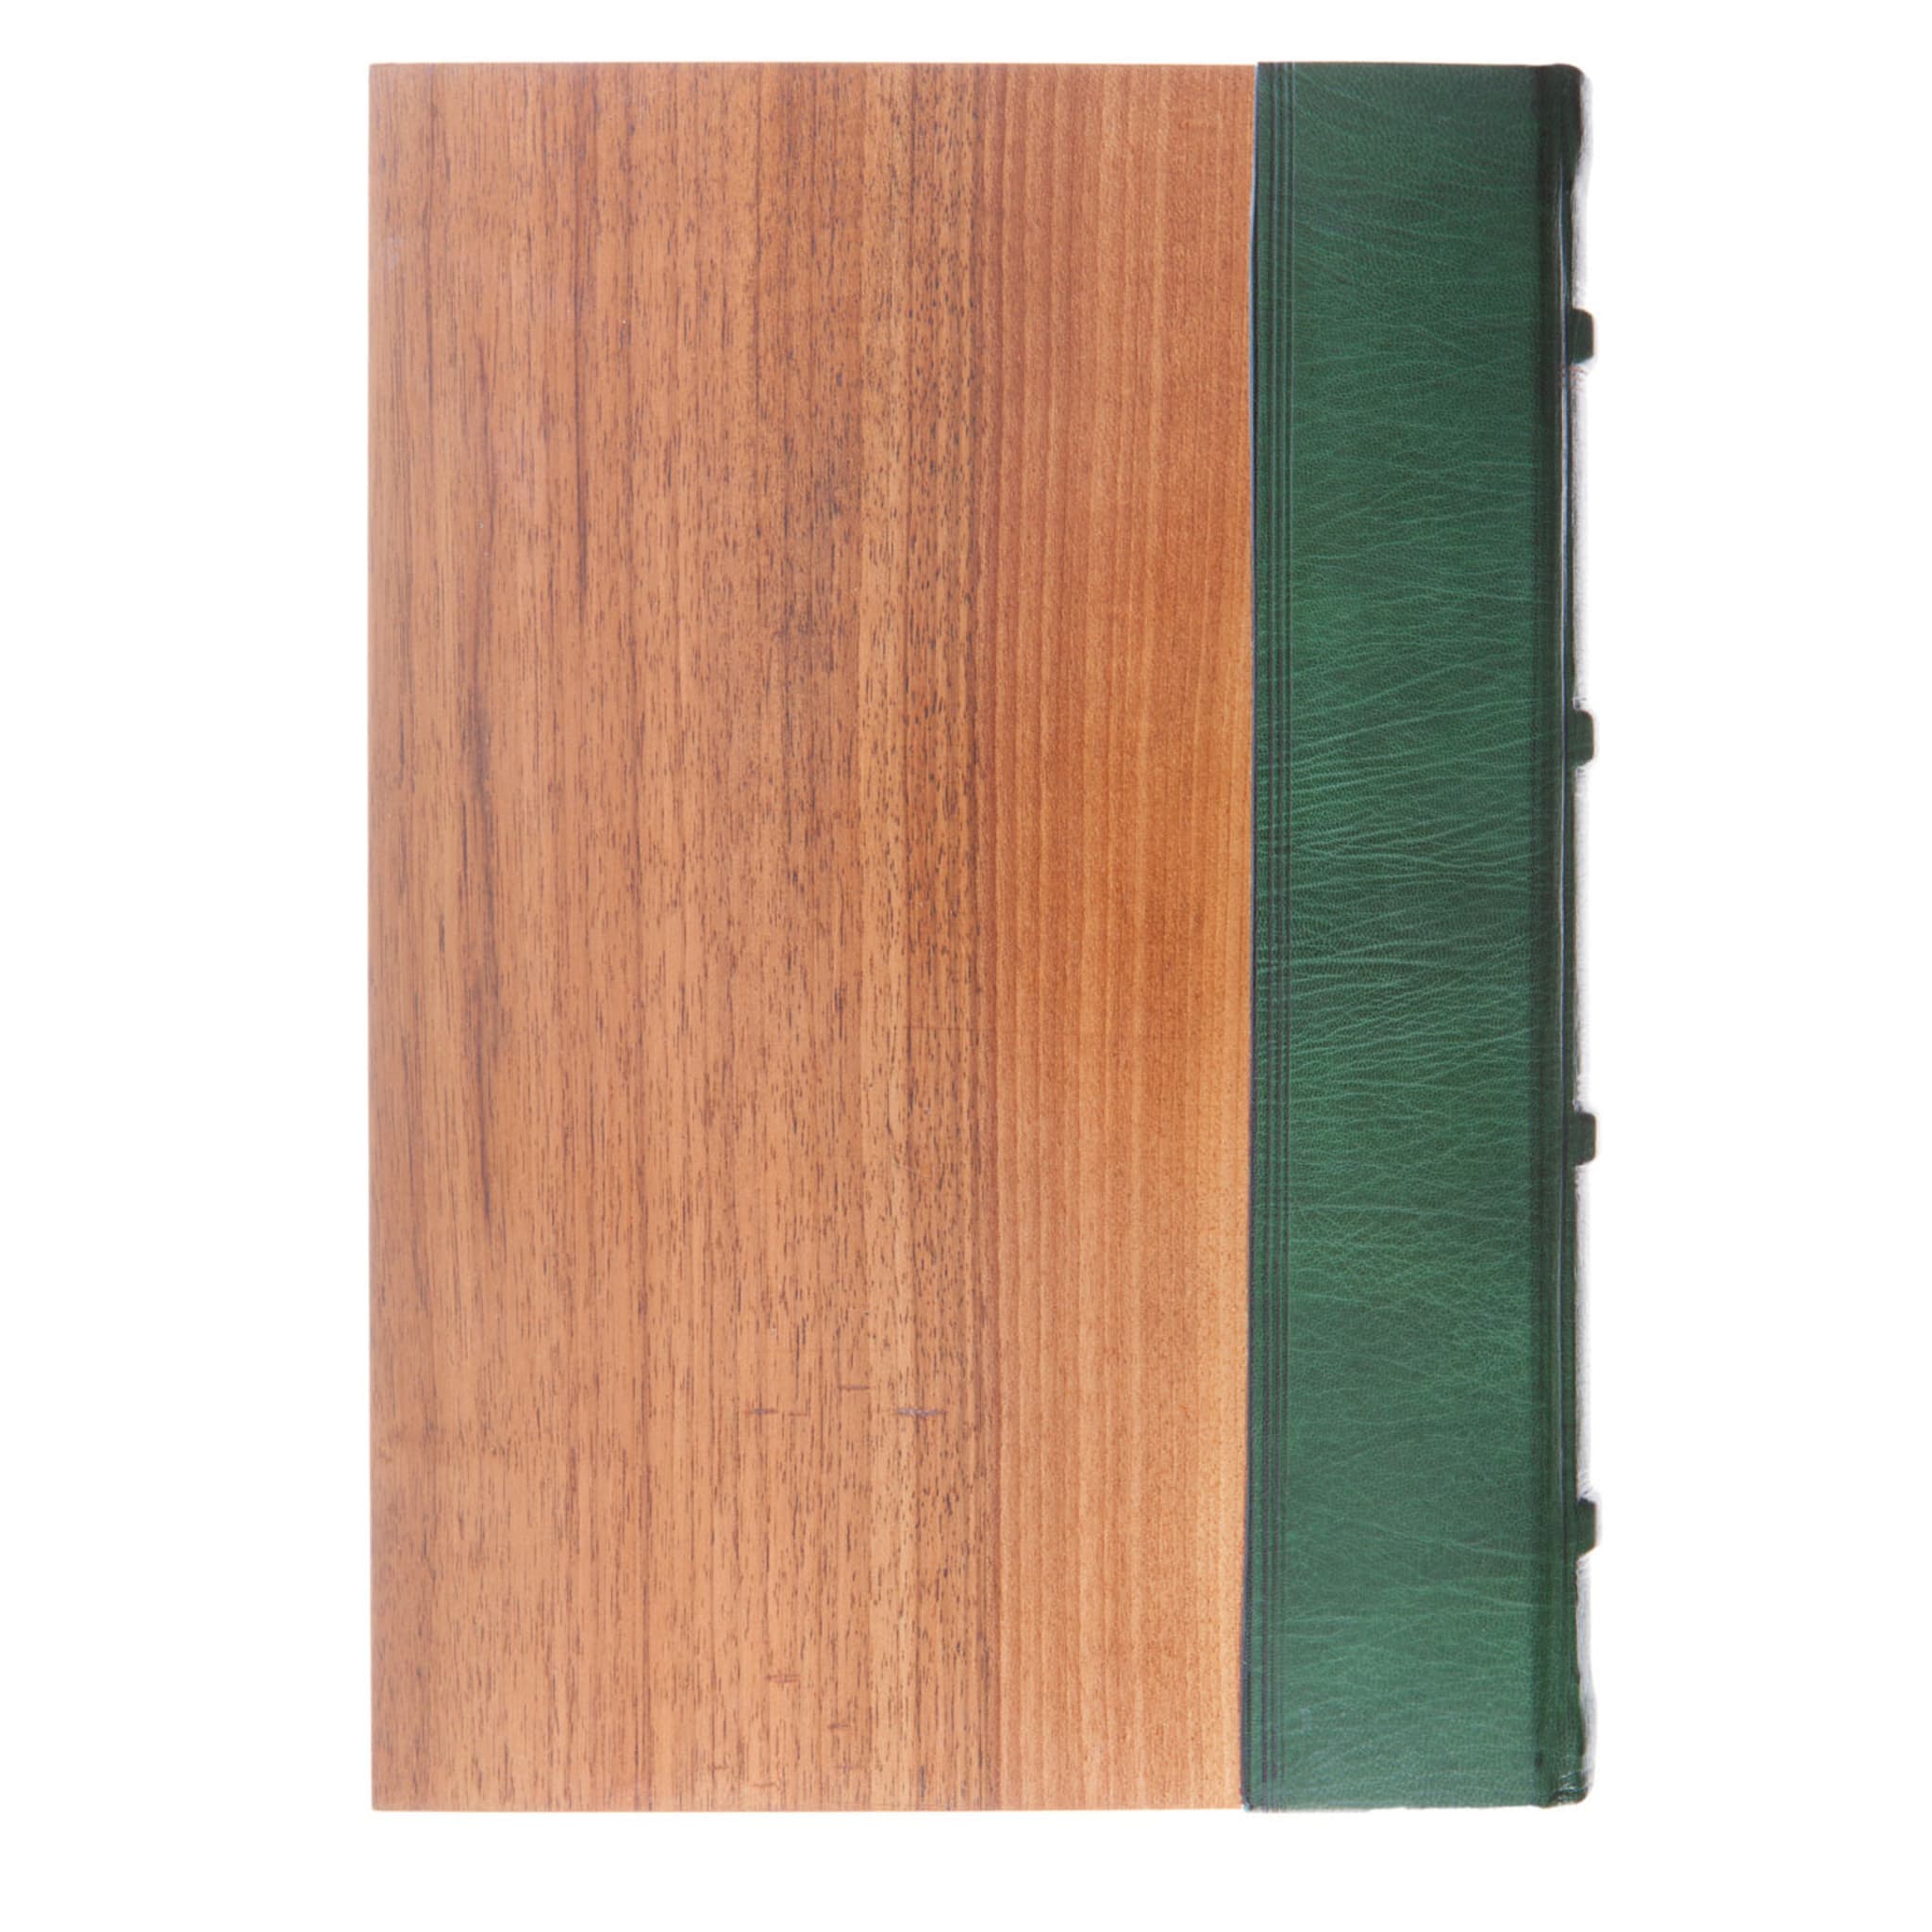 1600 Wood and Green Leather Book - Alternative view 2